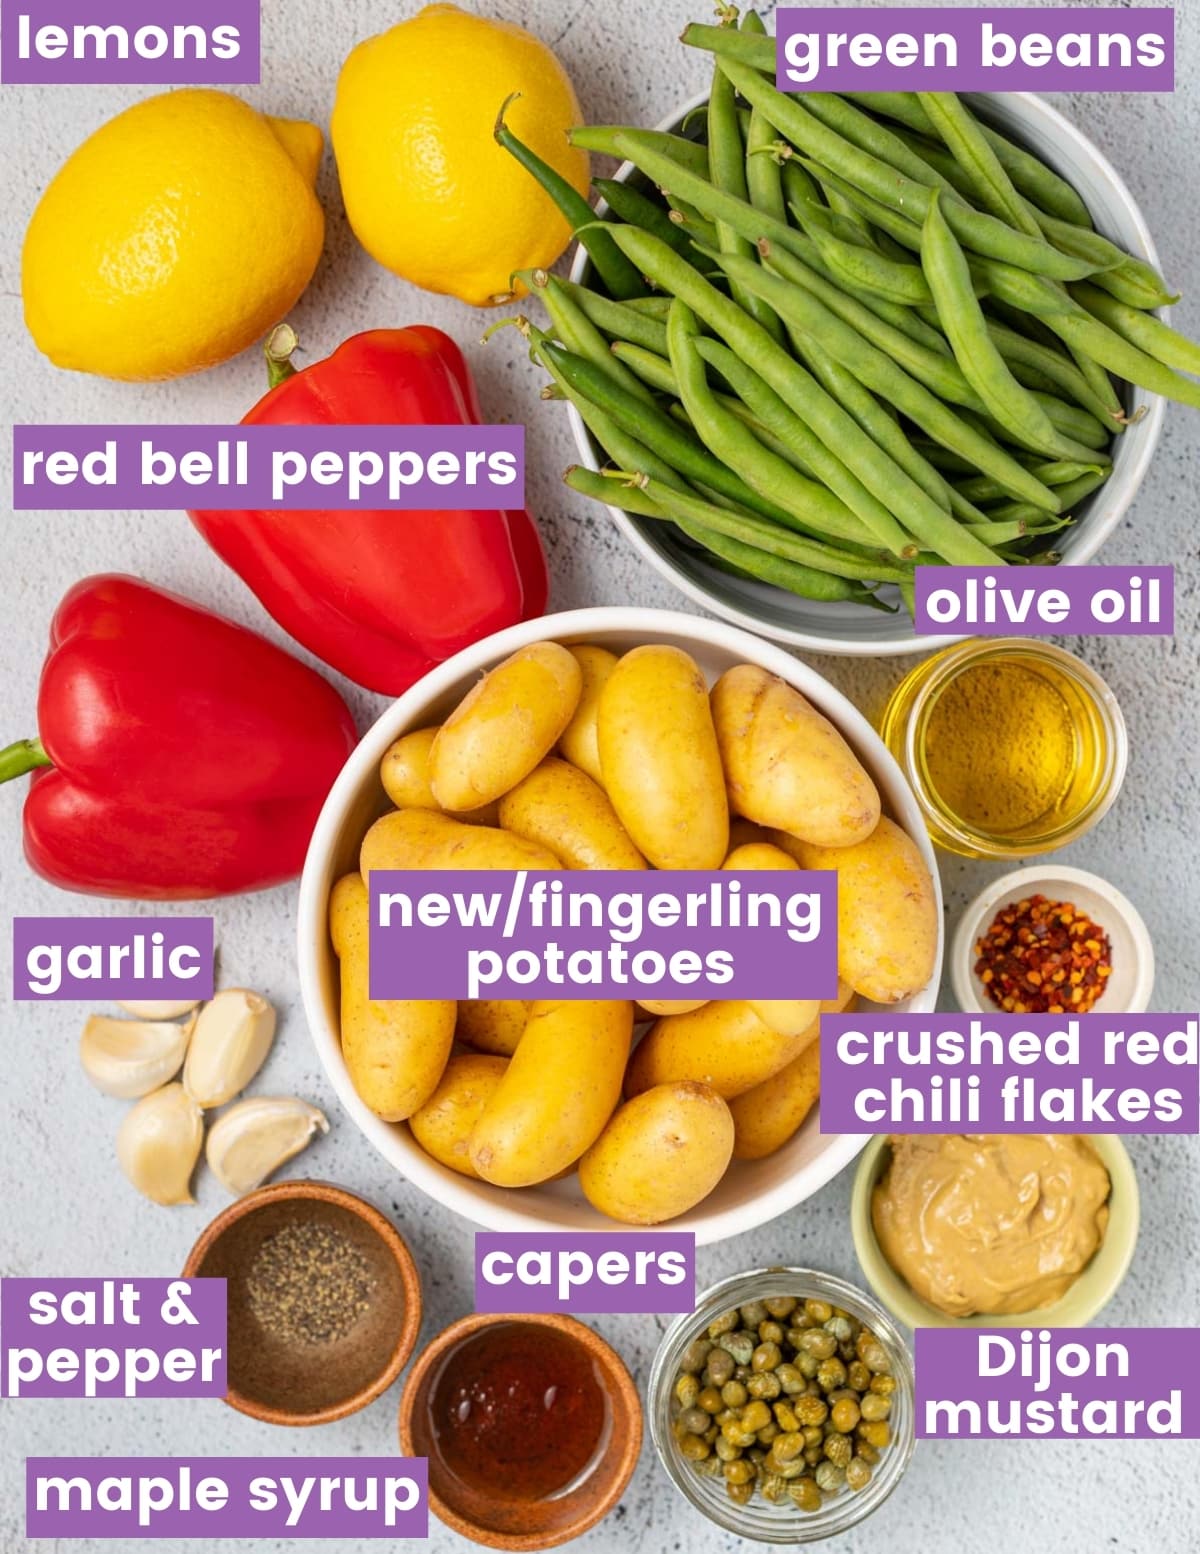 photograph of the ingredients as per the written ingredients list